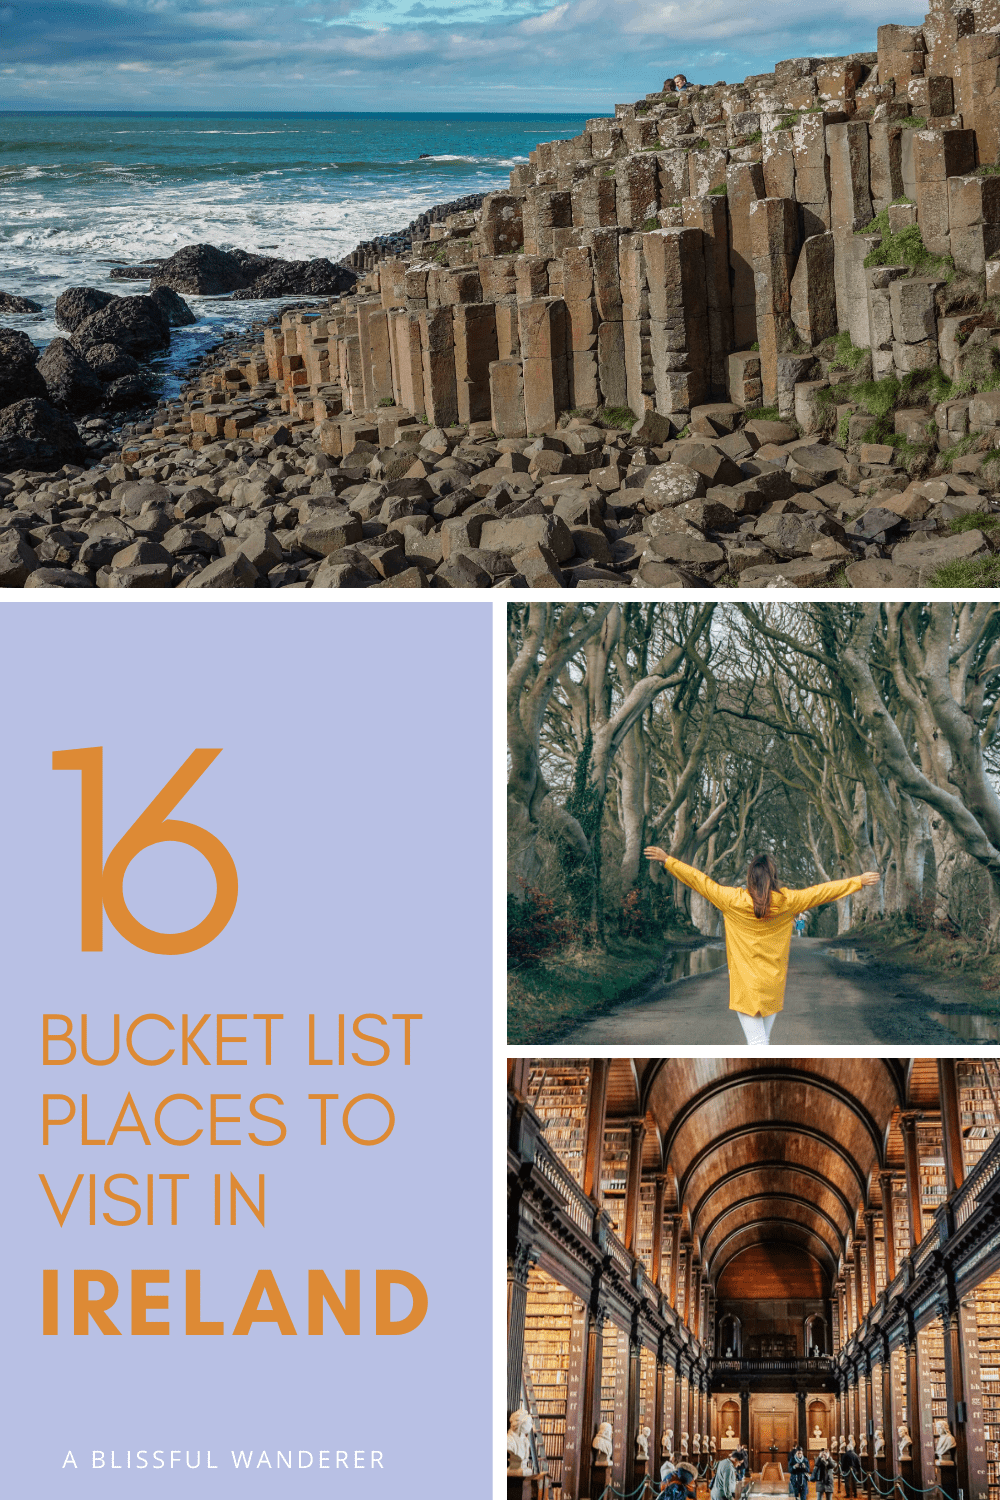 16 Bucket List Places to Visit in Ireland